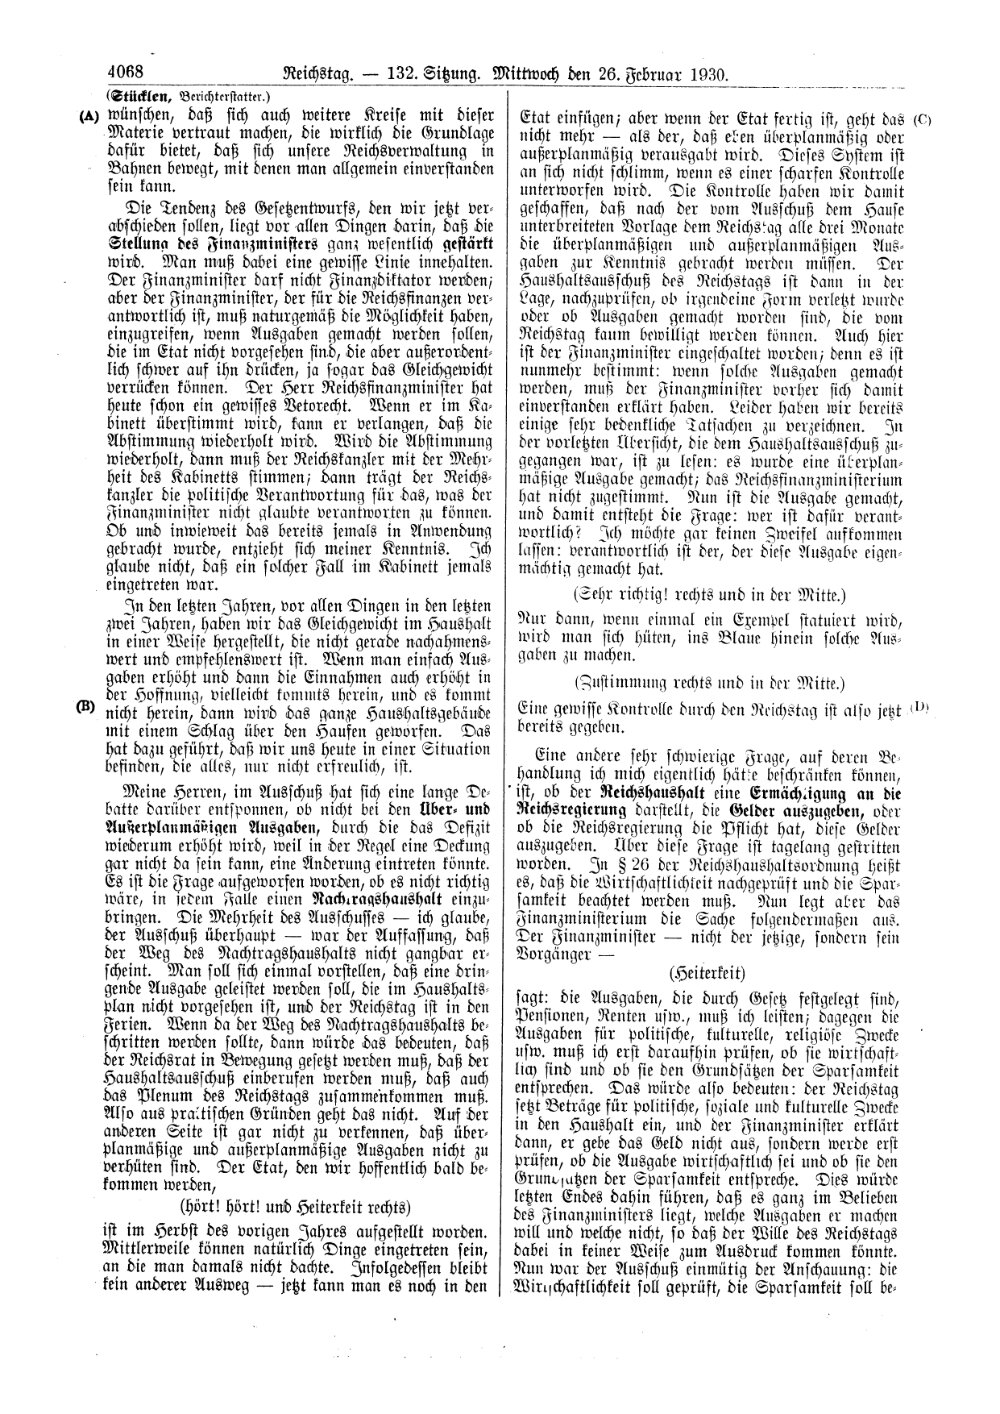 Scan of page 4068